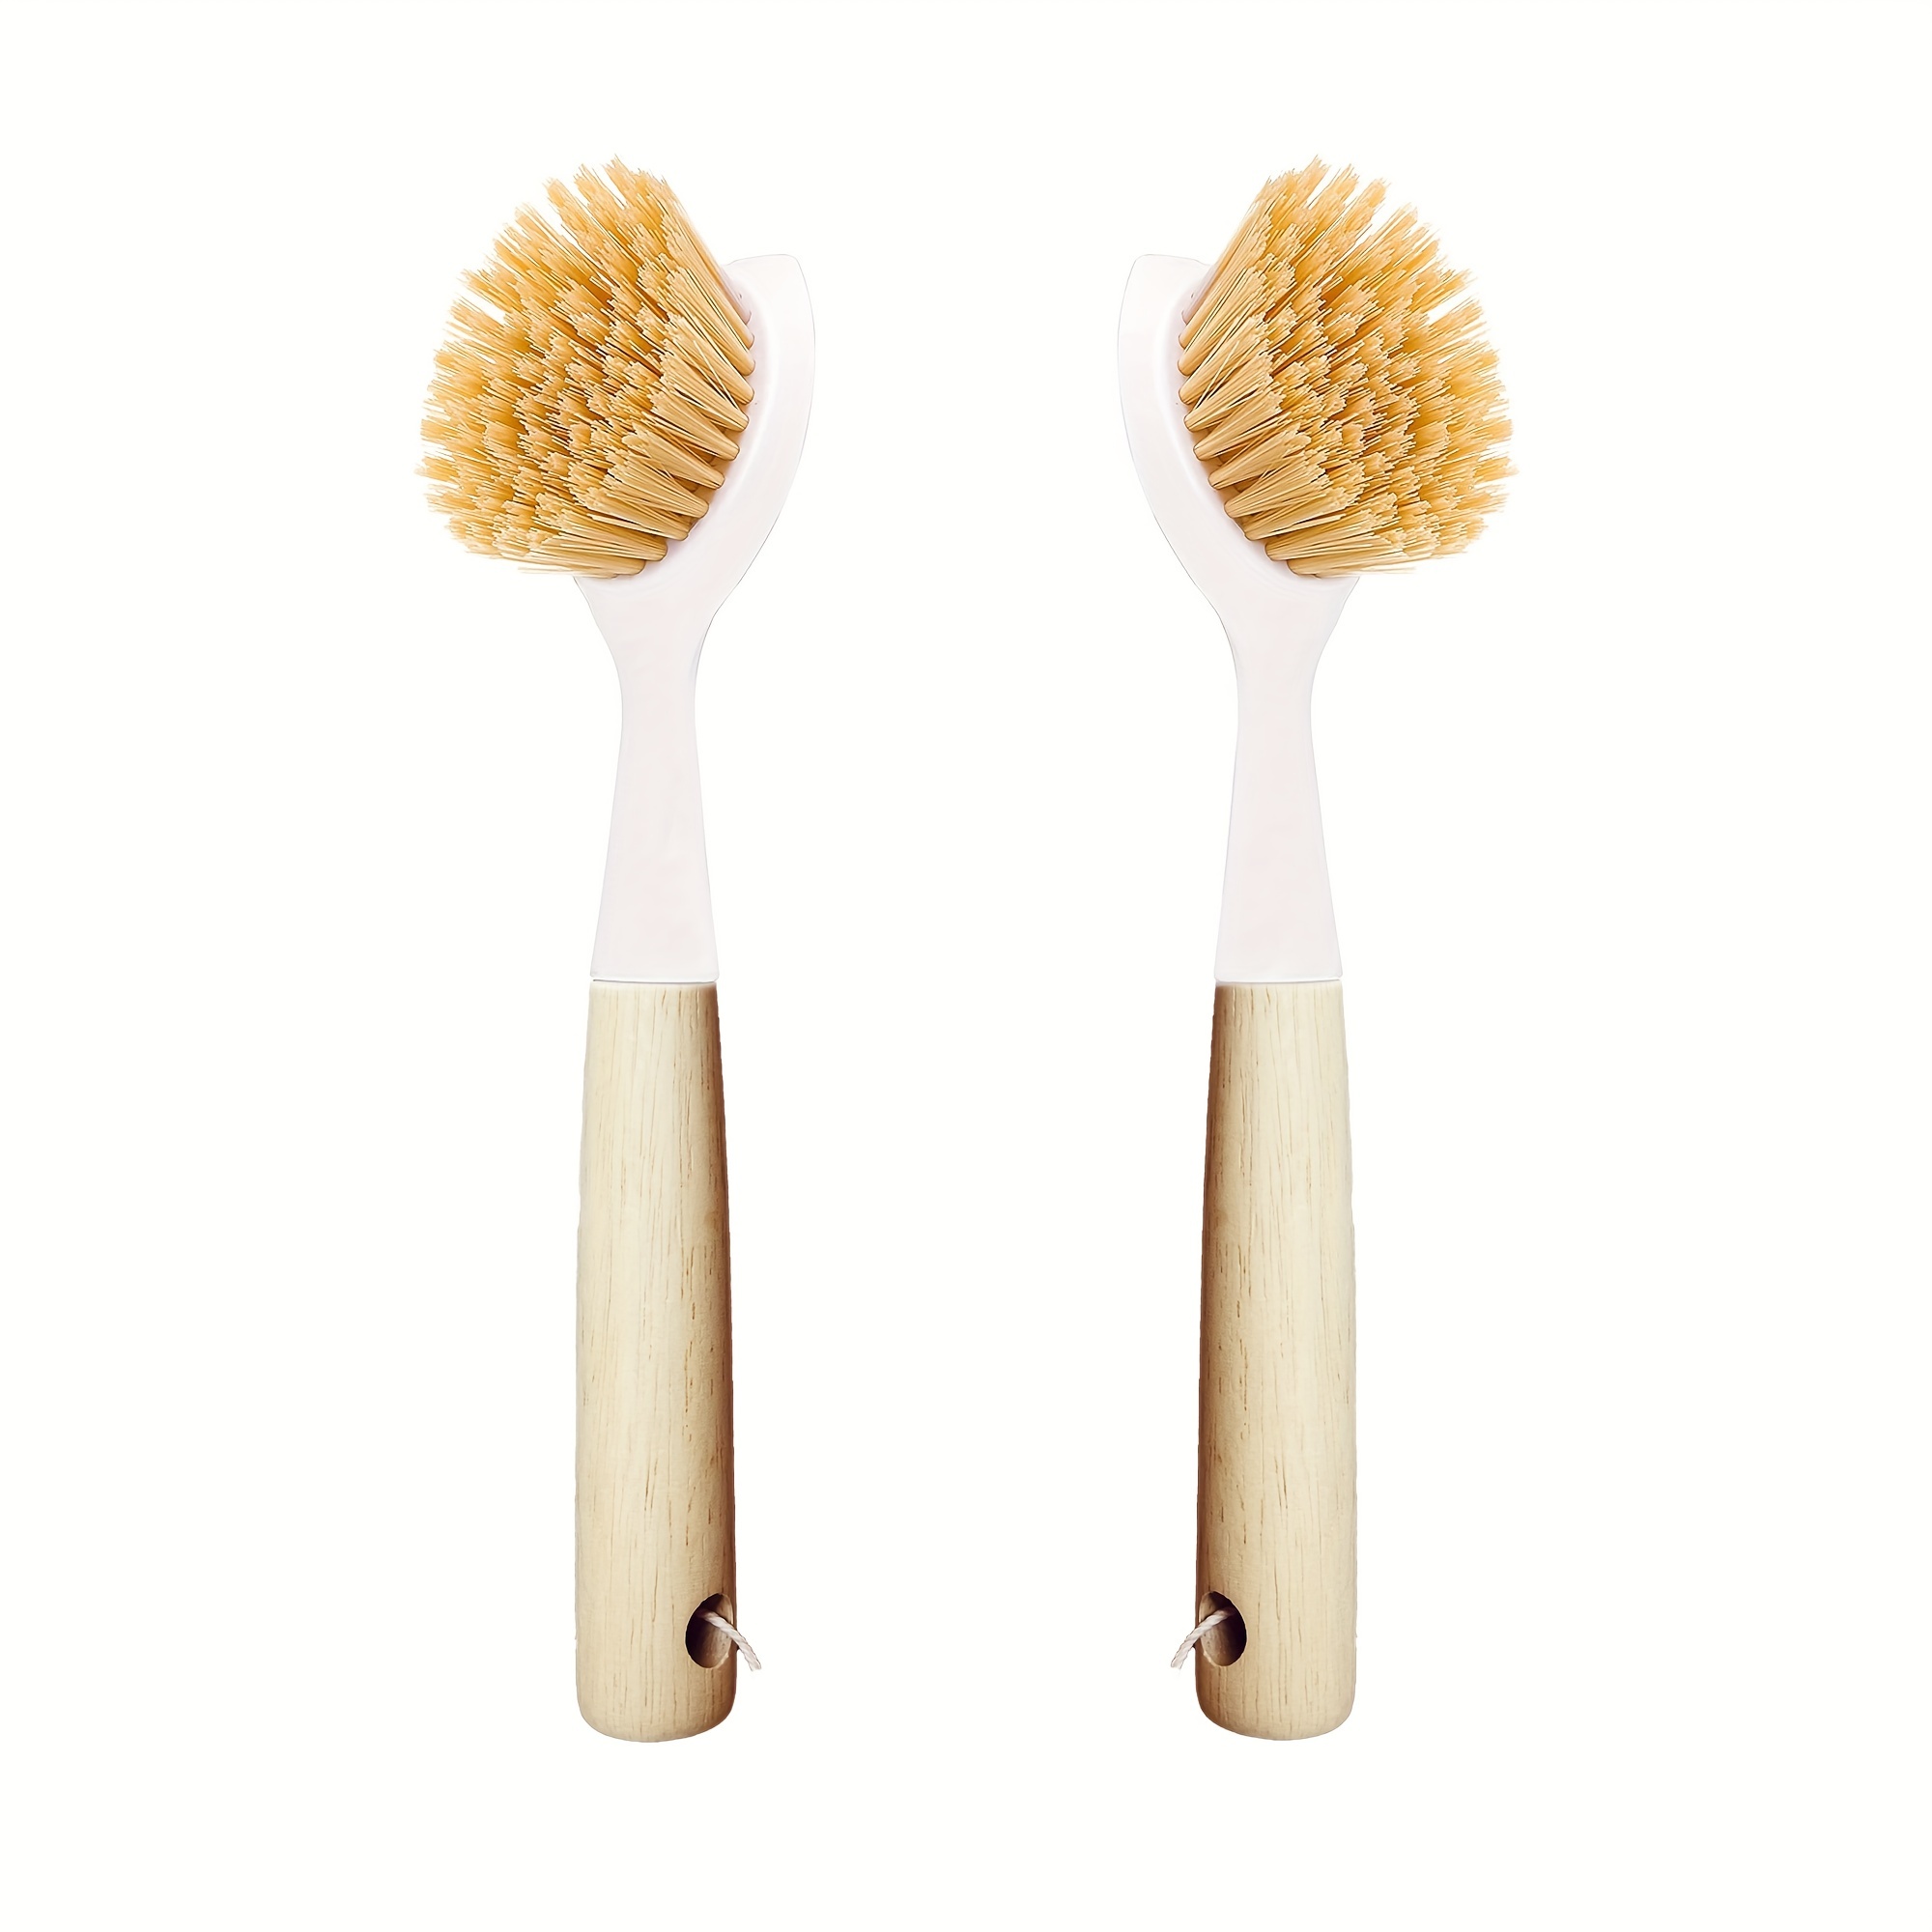 3 Pack Kitchen Dish Brush Bamboo Handle Dish Scrubber Built-in Scraper,  Scrub Brush for Pans, Pots, Kitchen Sink Cleaning, Dishwashing and Cleaning